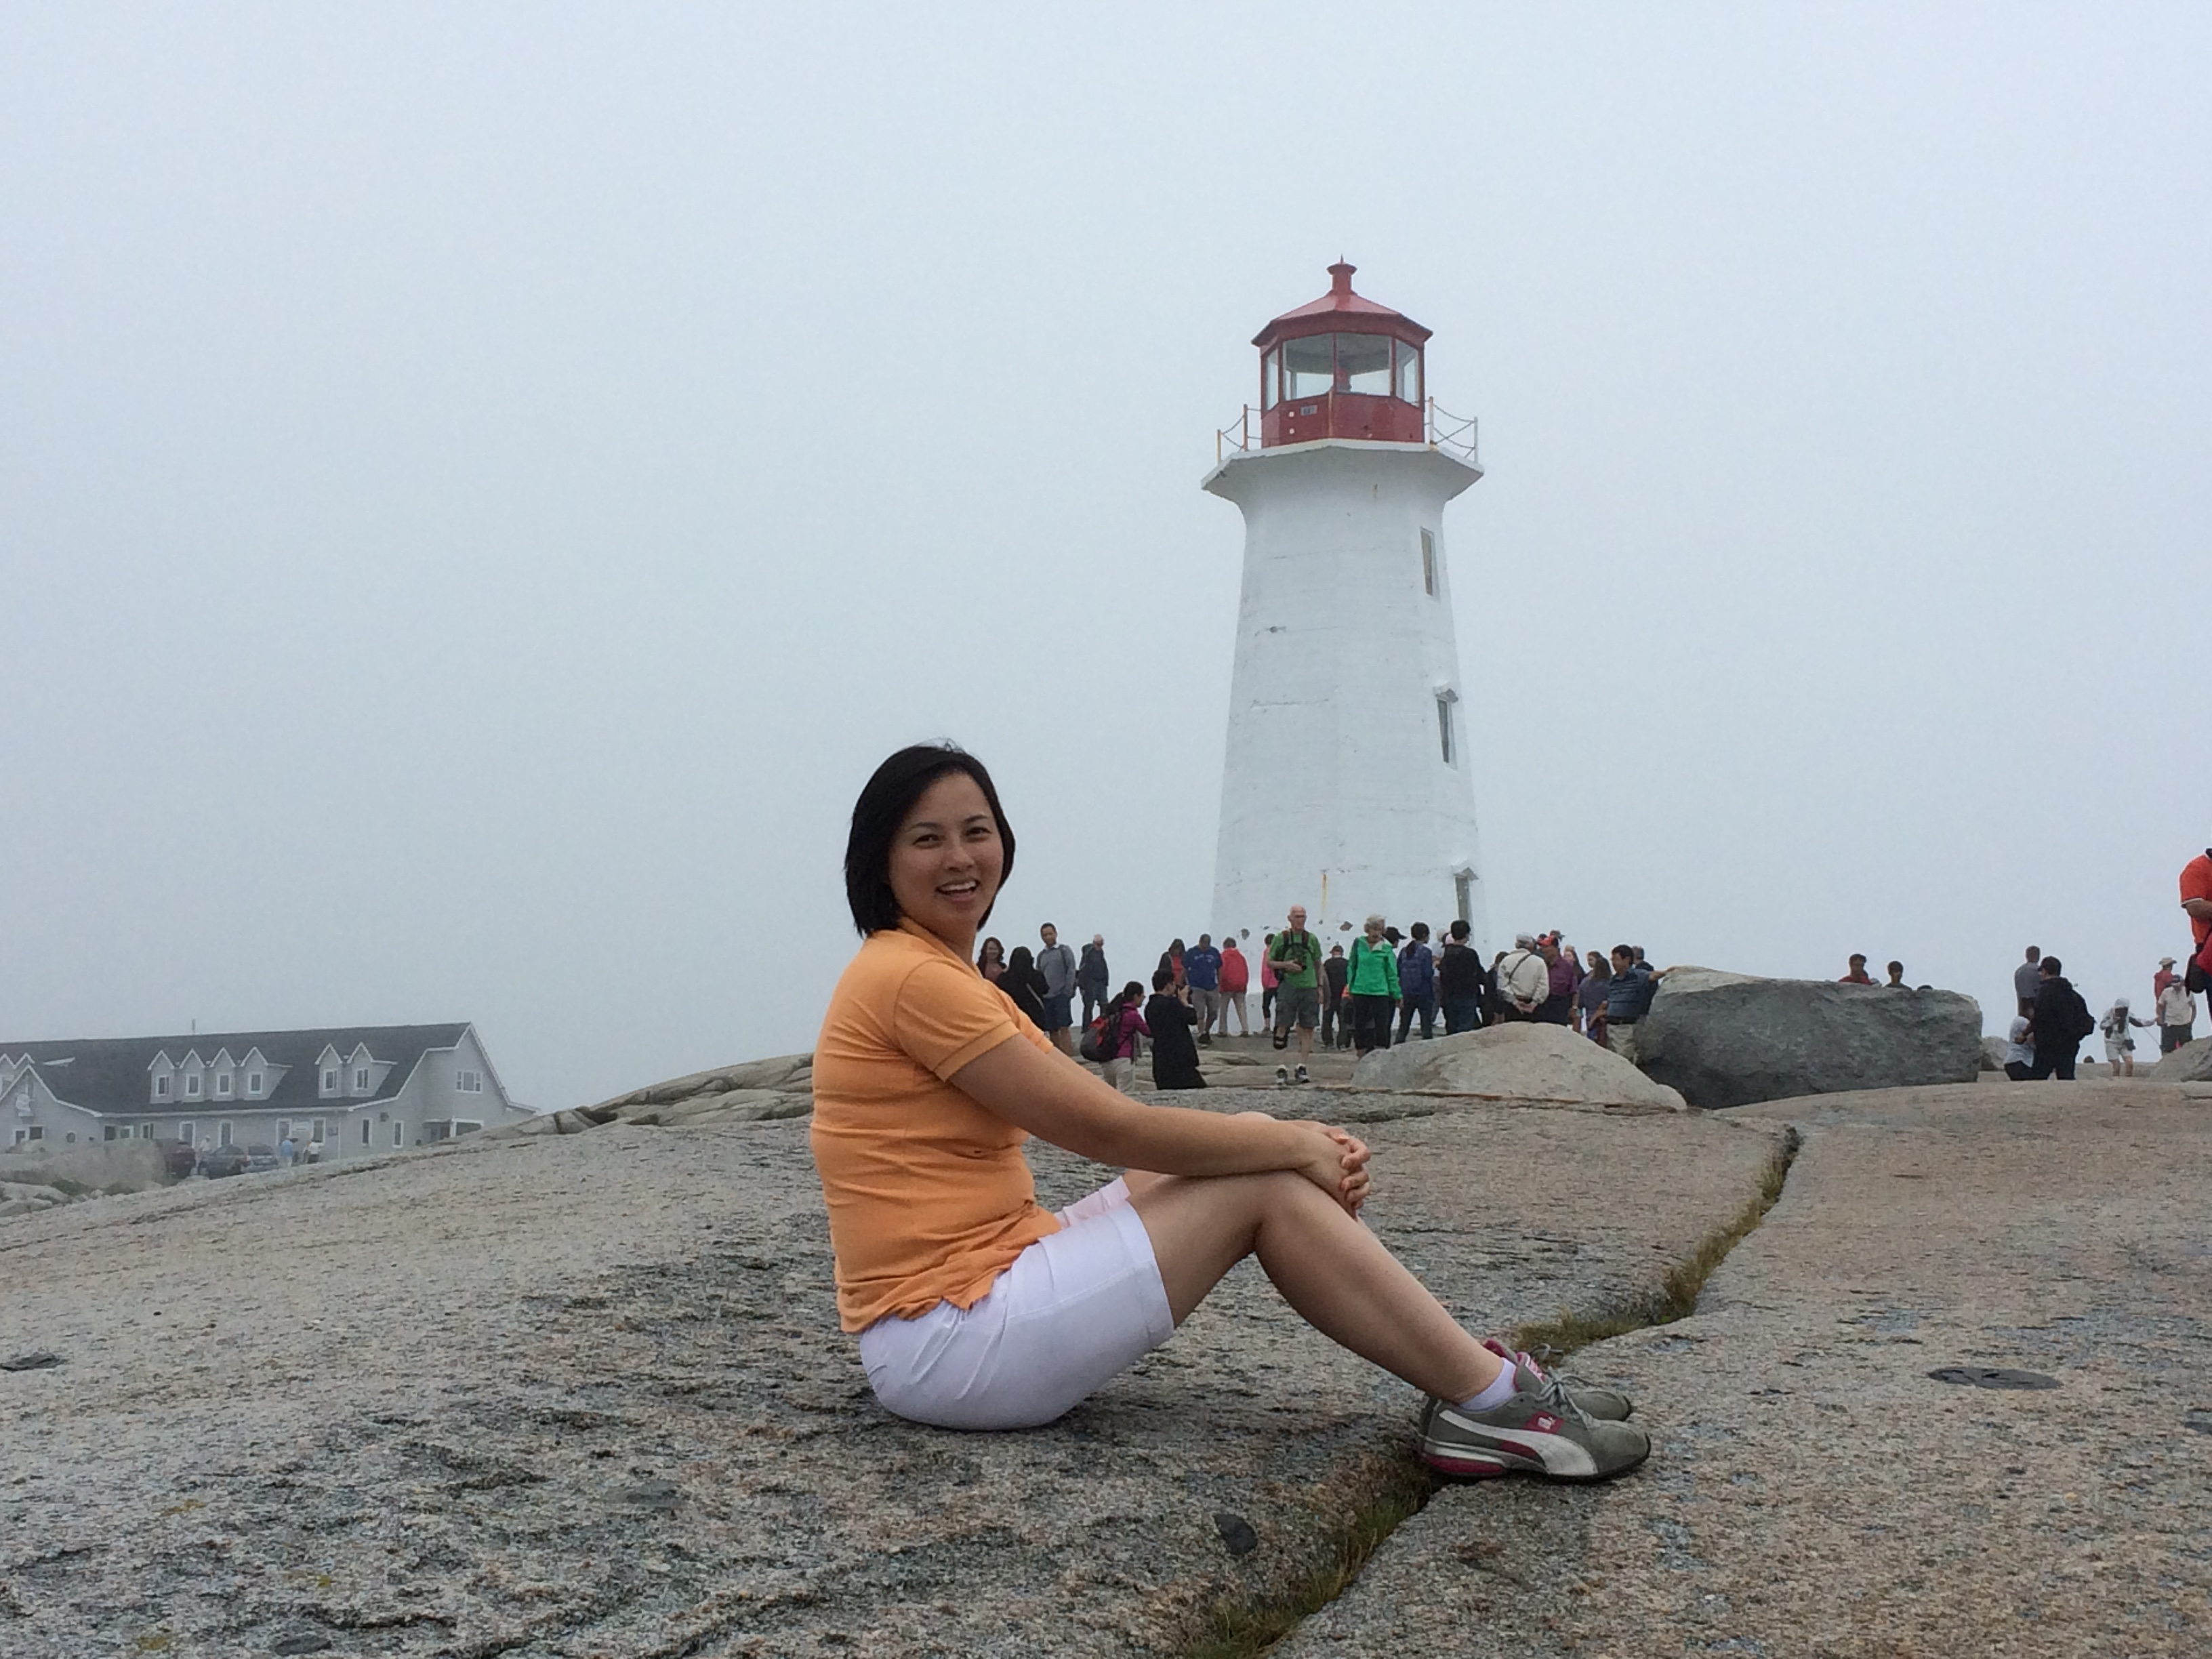 I am at Peggy's Cove NS